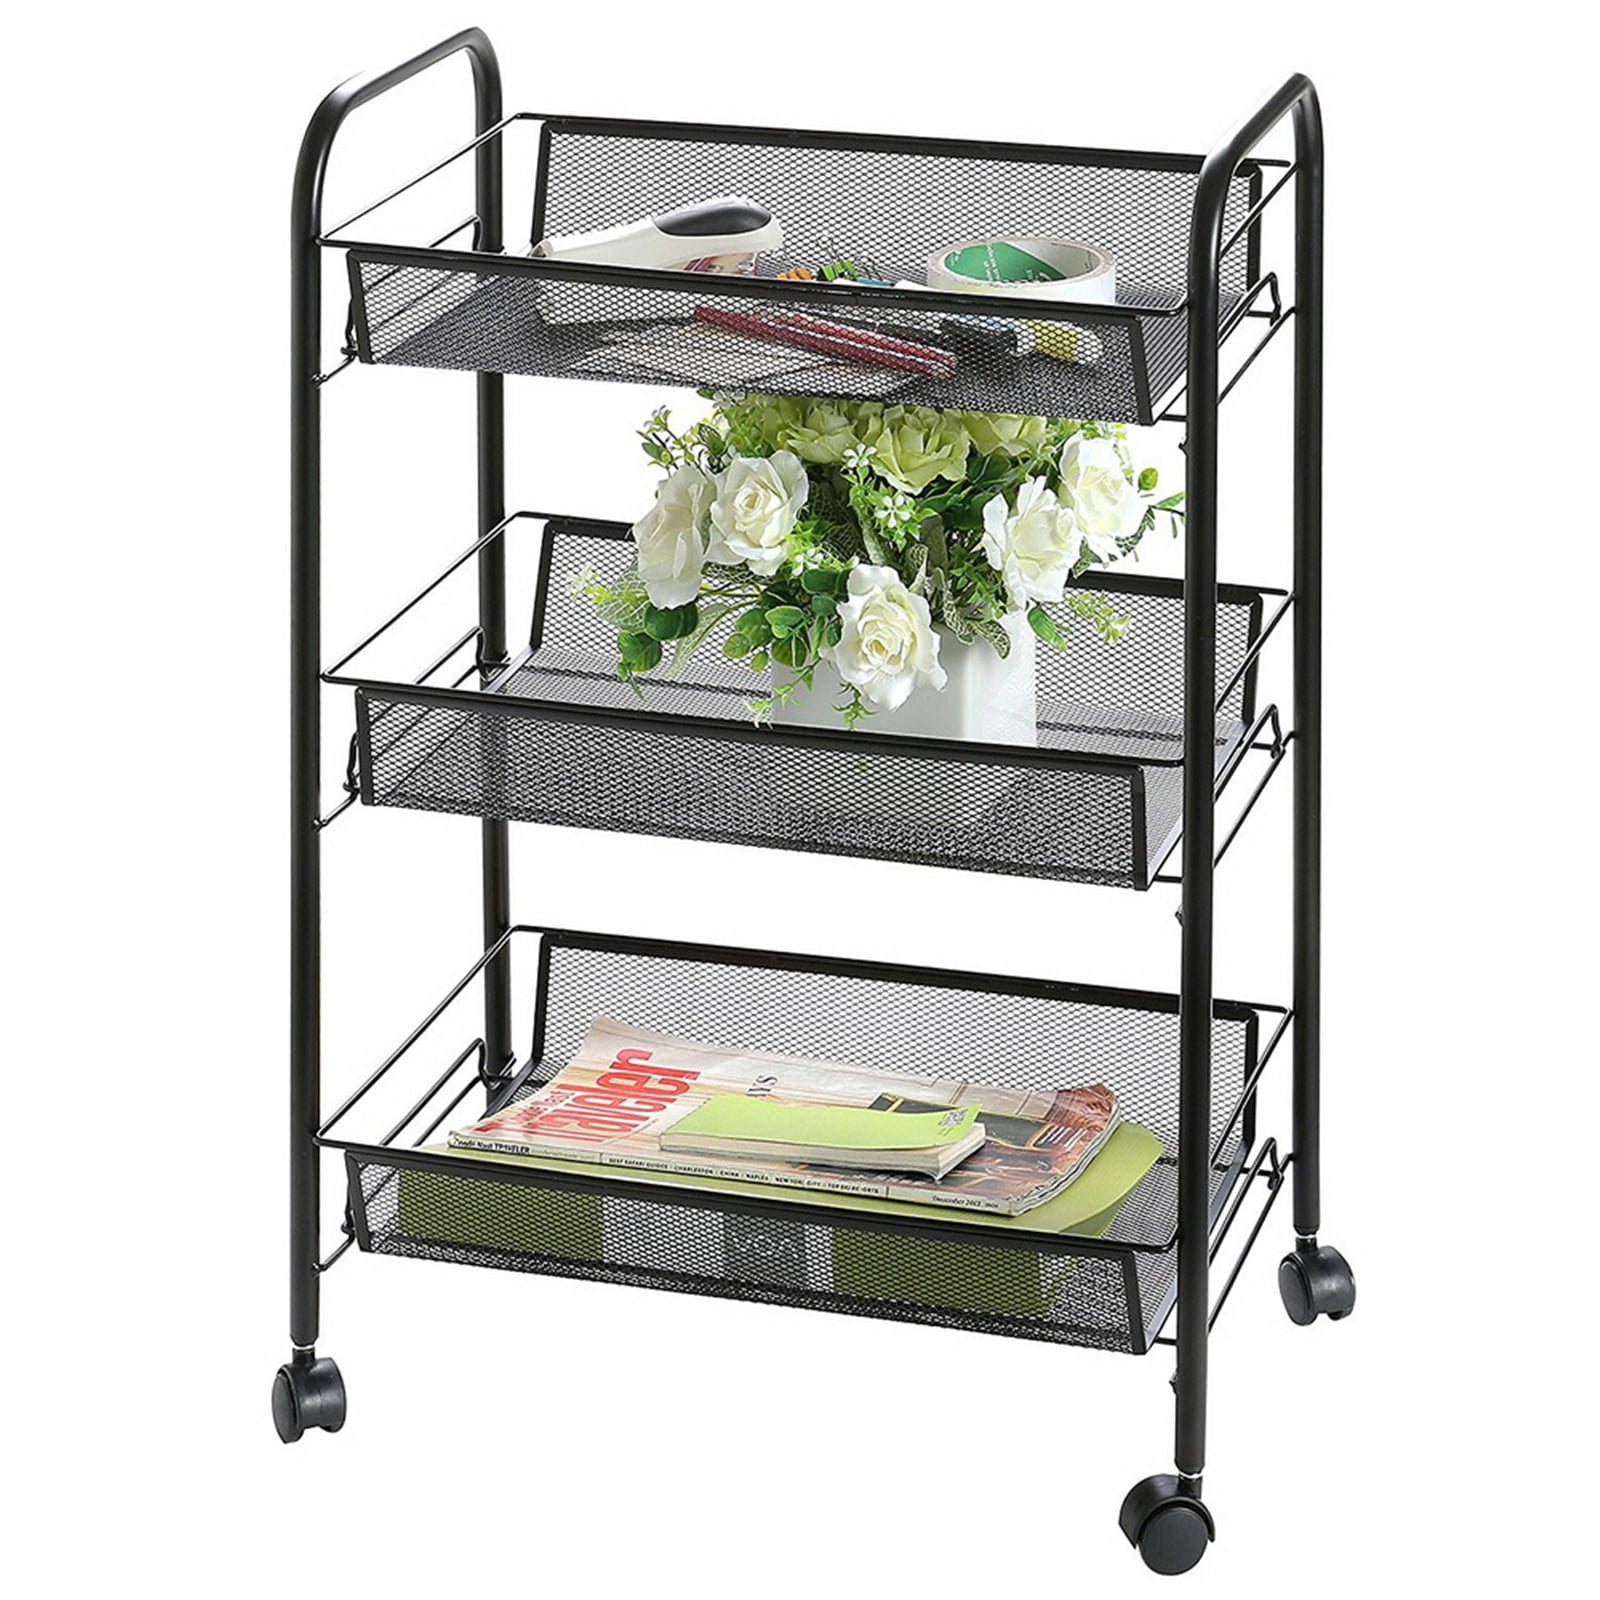 Details about   Exquisite Honeycomb Net Three Tiers Storage Cart with Hook Black 